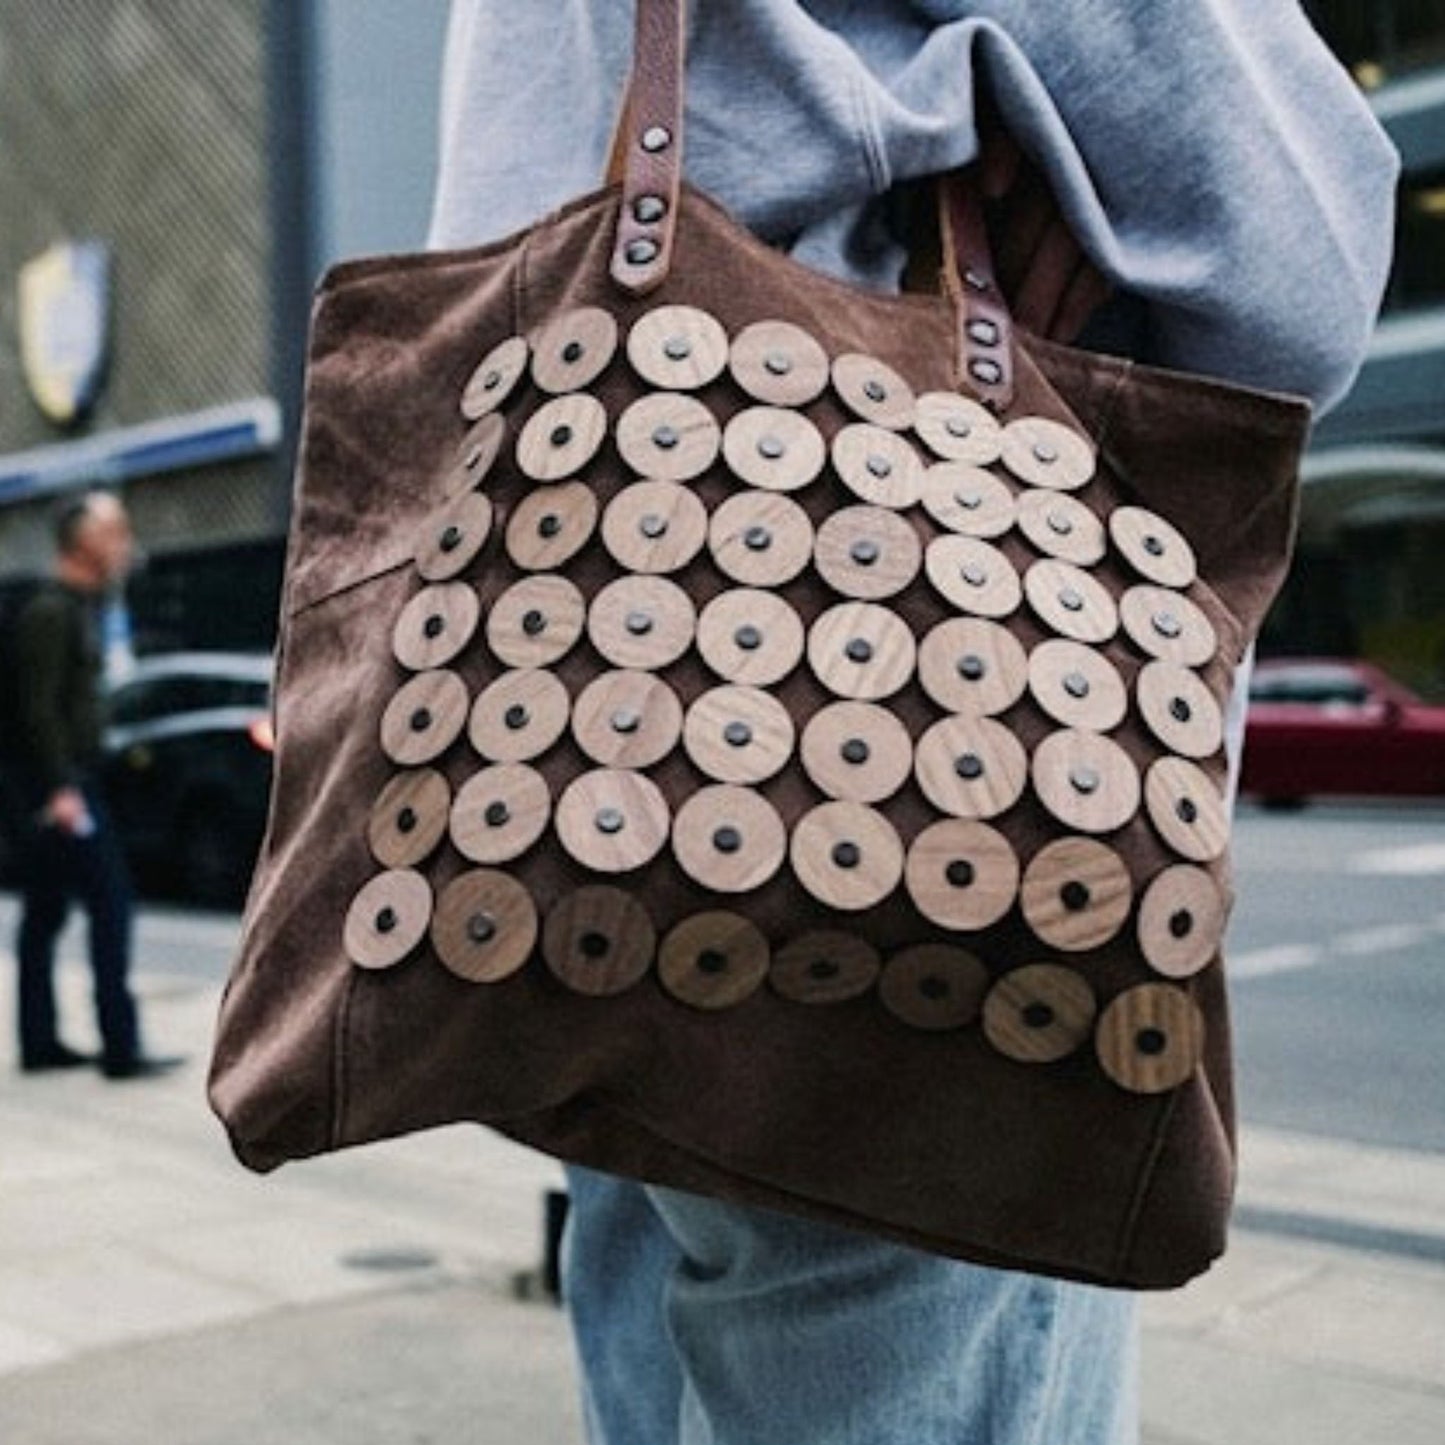 METANoIA light tan recycled leather medium handbag with circle bamboo and walnut forms fashioned into a repetitive fashion with a smaller circle overlay on each form. Model wearing bag over her shoulder while waiting for pedestrian lights.